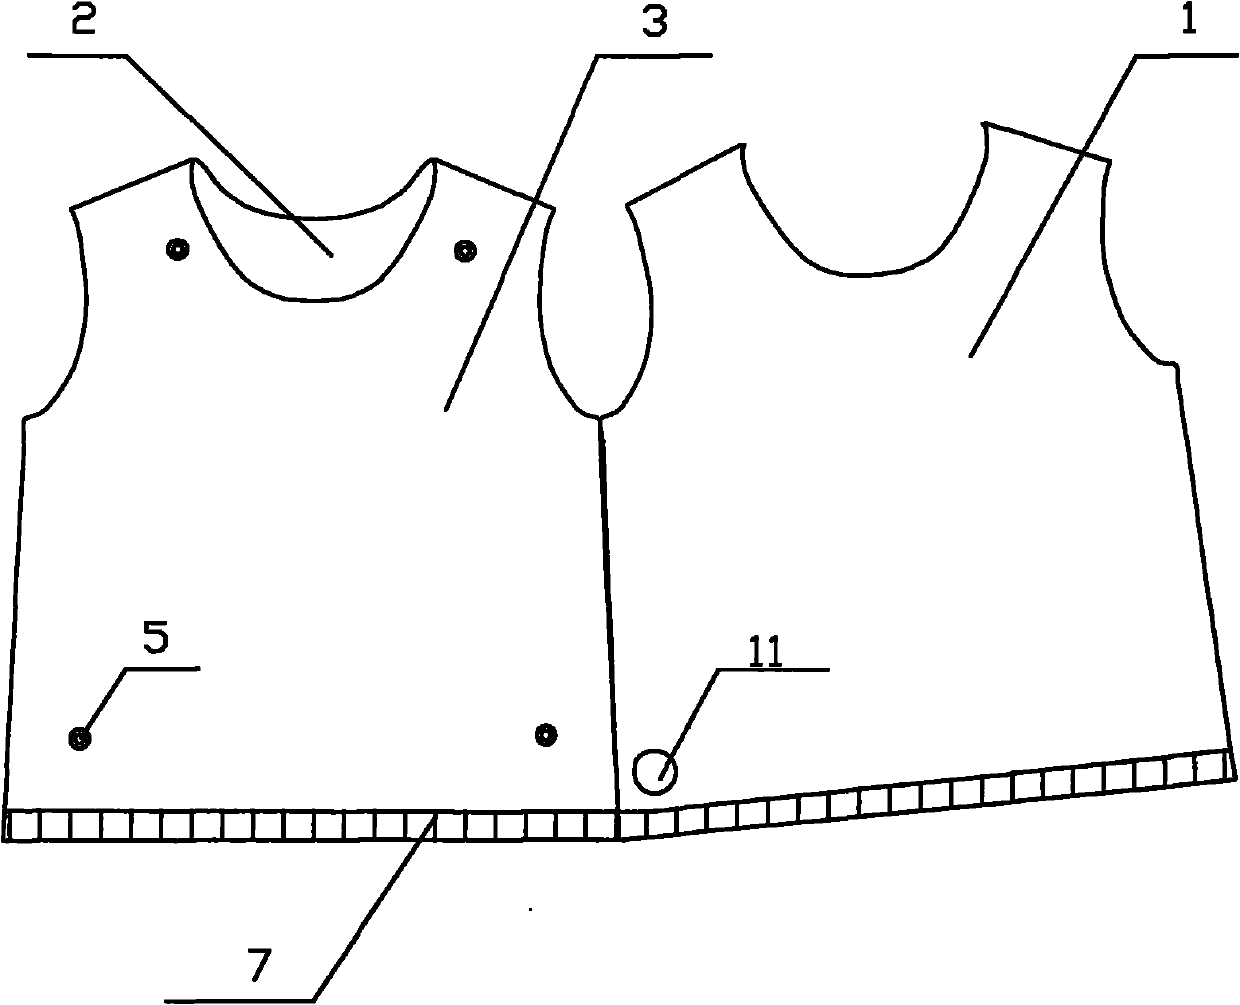 Garment for acquiring heartbeat frequency in real time